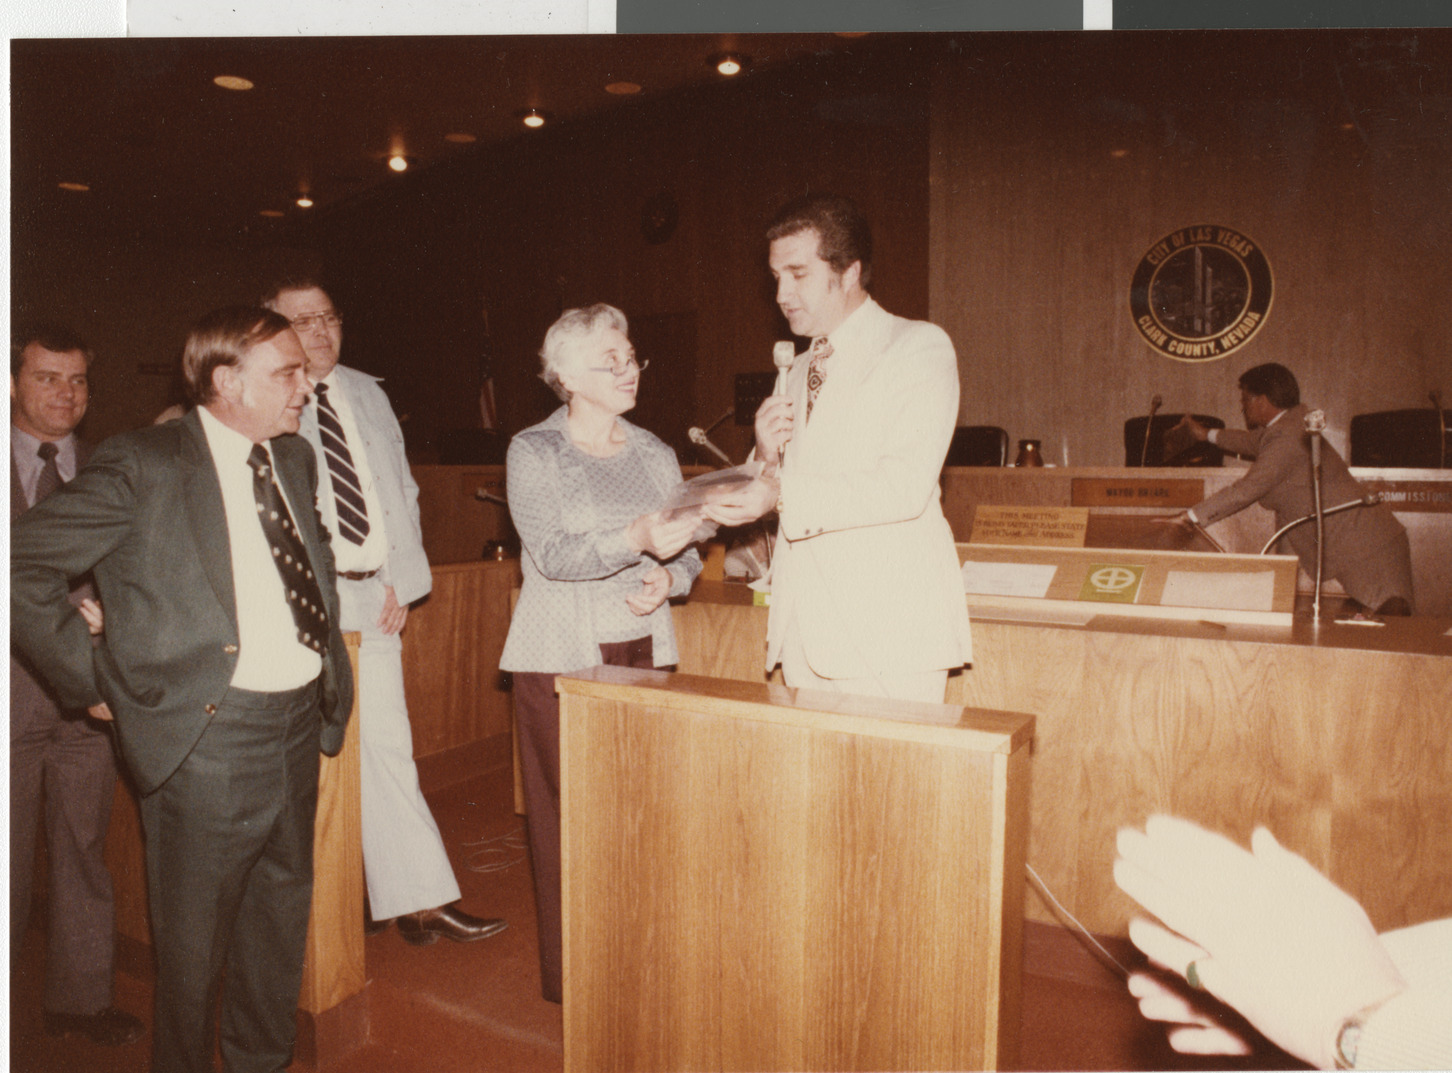 Photograph of Ron Lurie presenting certificate, circa 1978